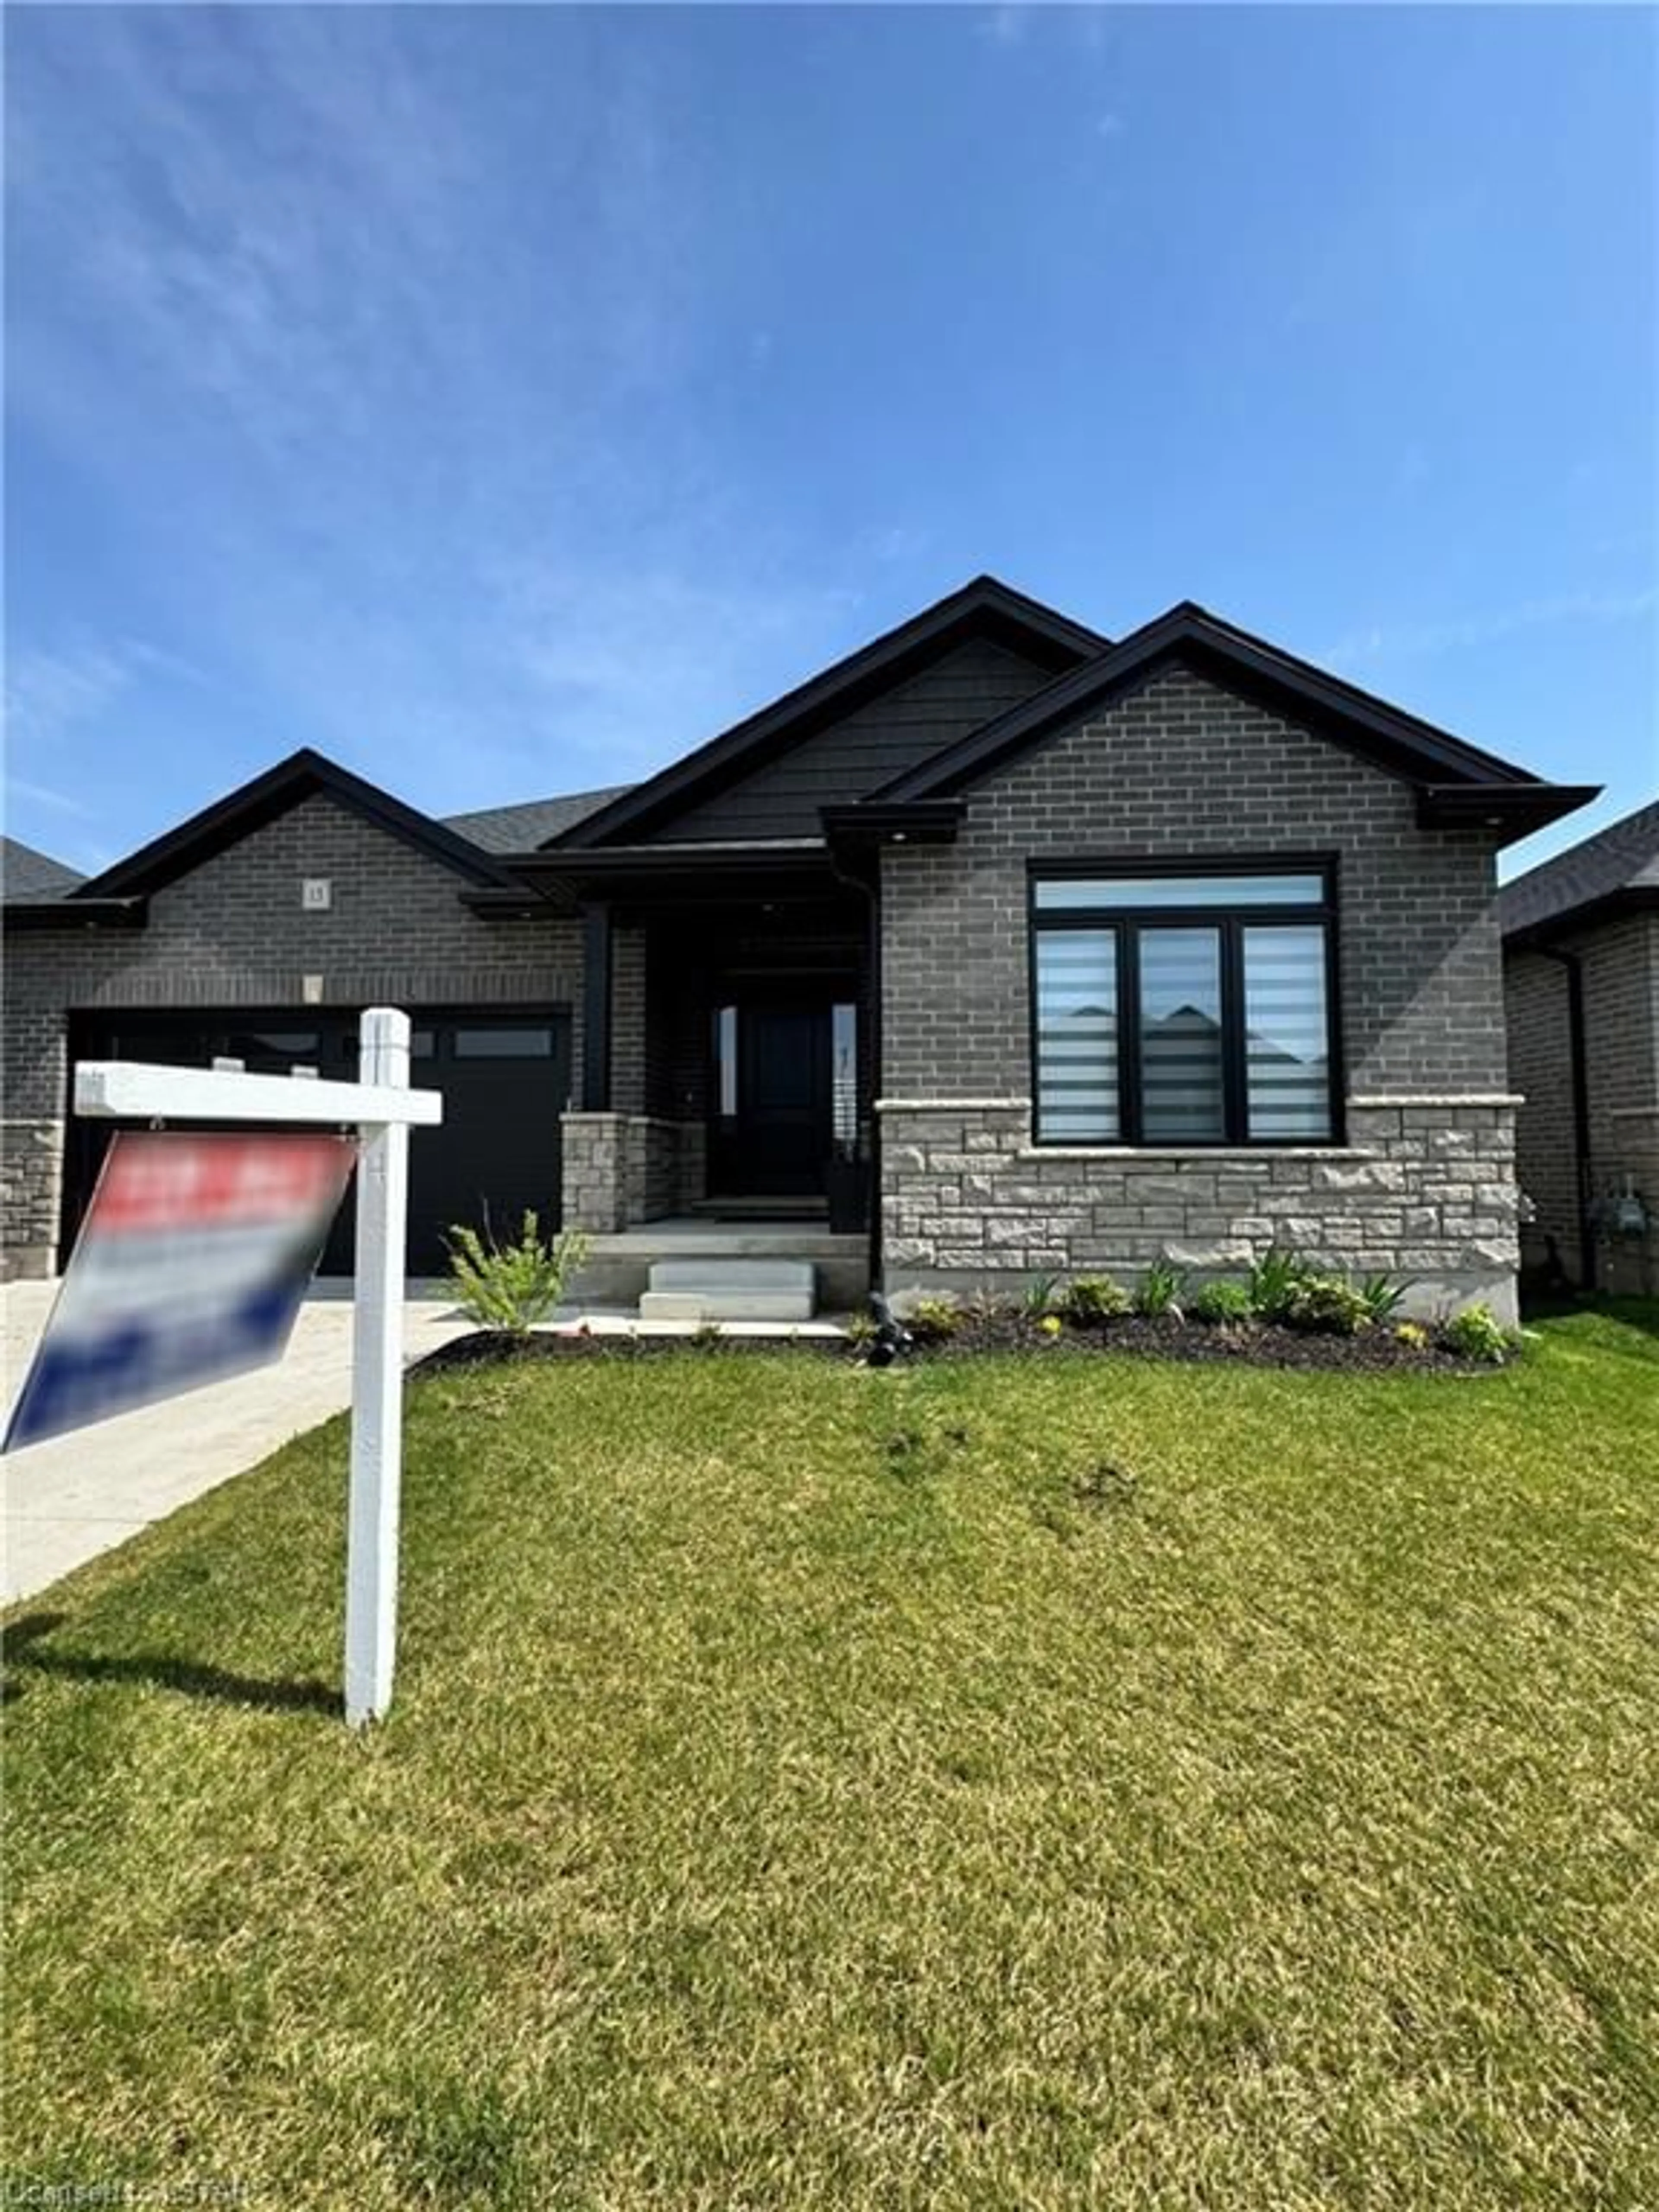 Frontside or backside of a home for 383 Daventry Way #13, Komoka Ontario N0L 1R0